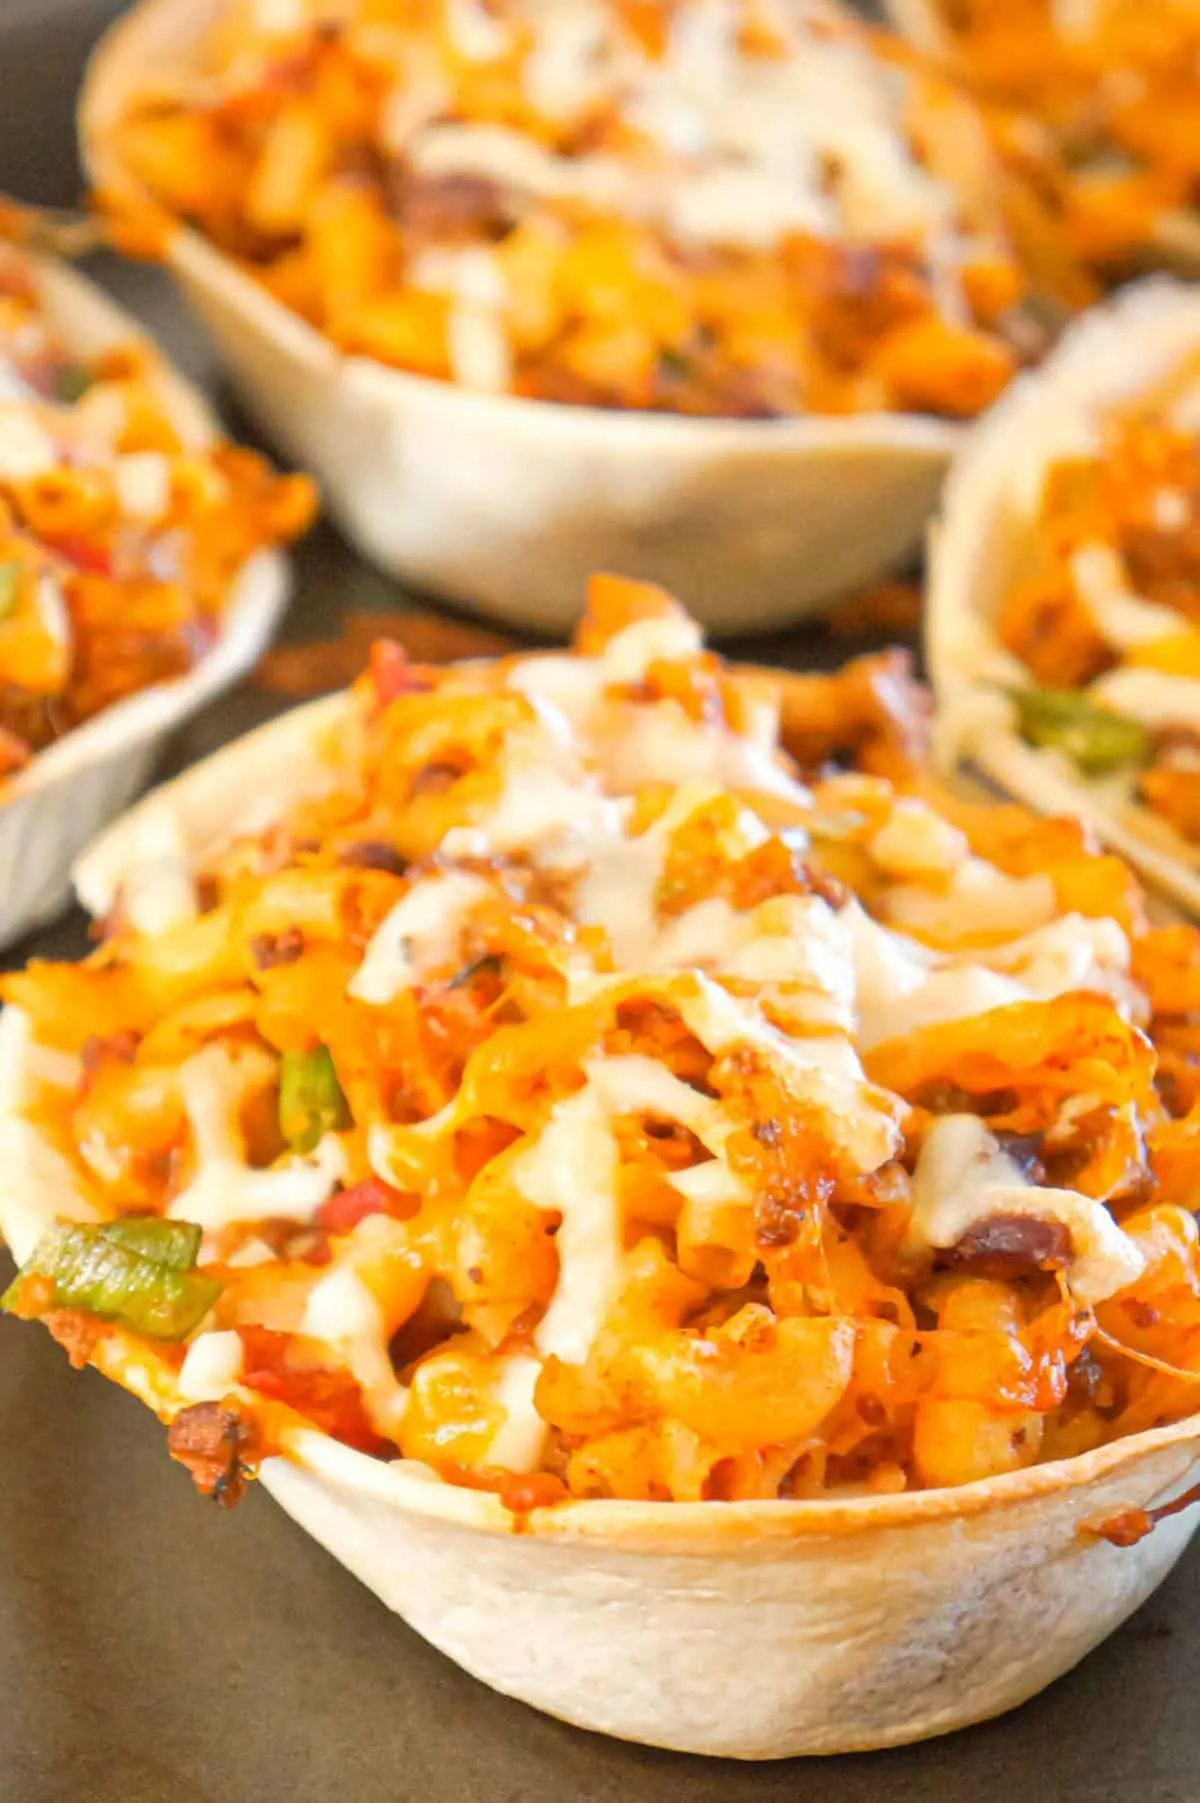 Taco Pasta is a delicious macaroni recipe loaded with ground beef, salsa, taco sauce and cheese all baked in soft shell taco bowls.